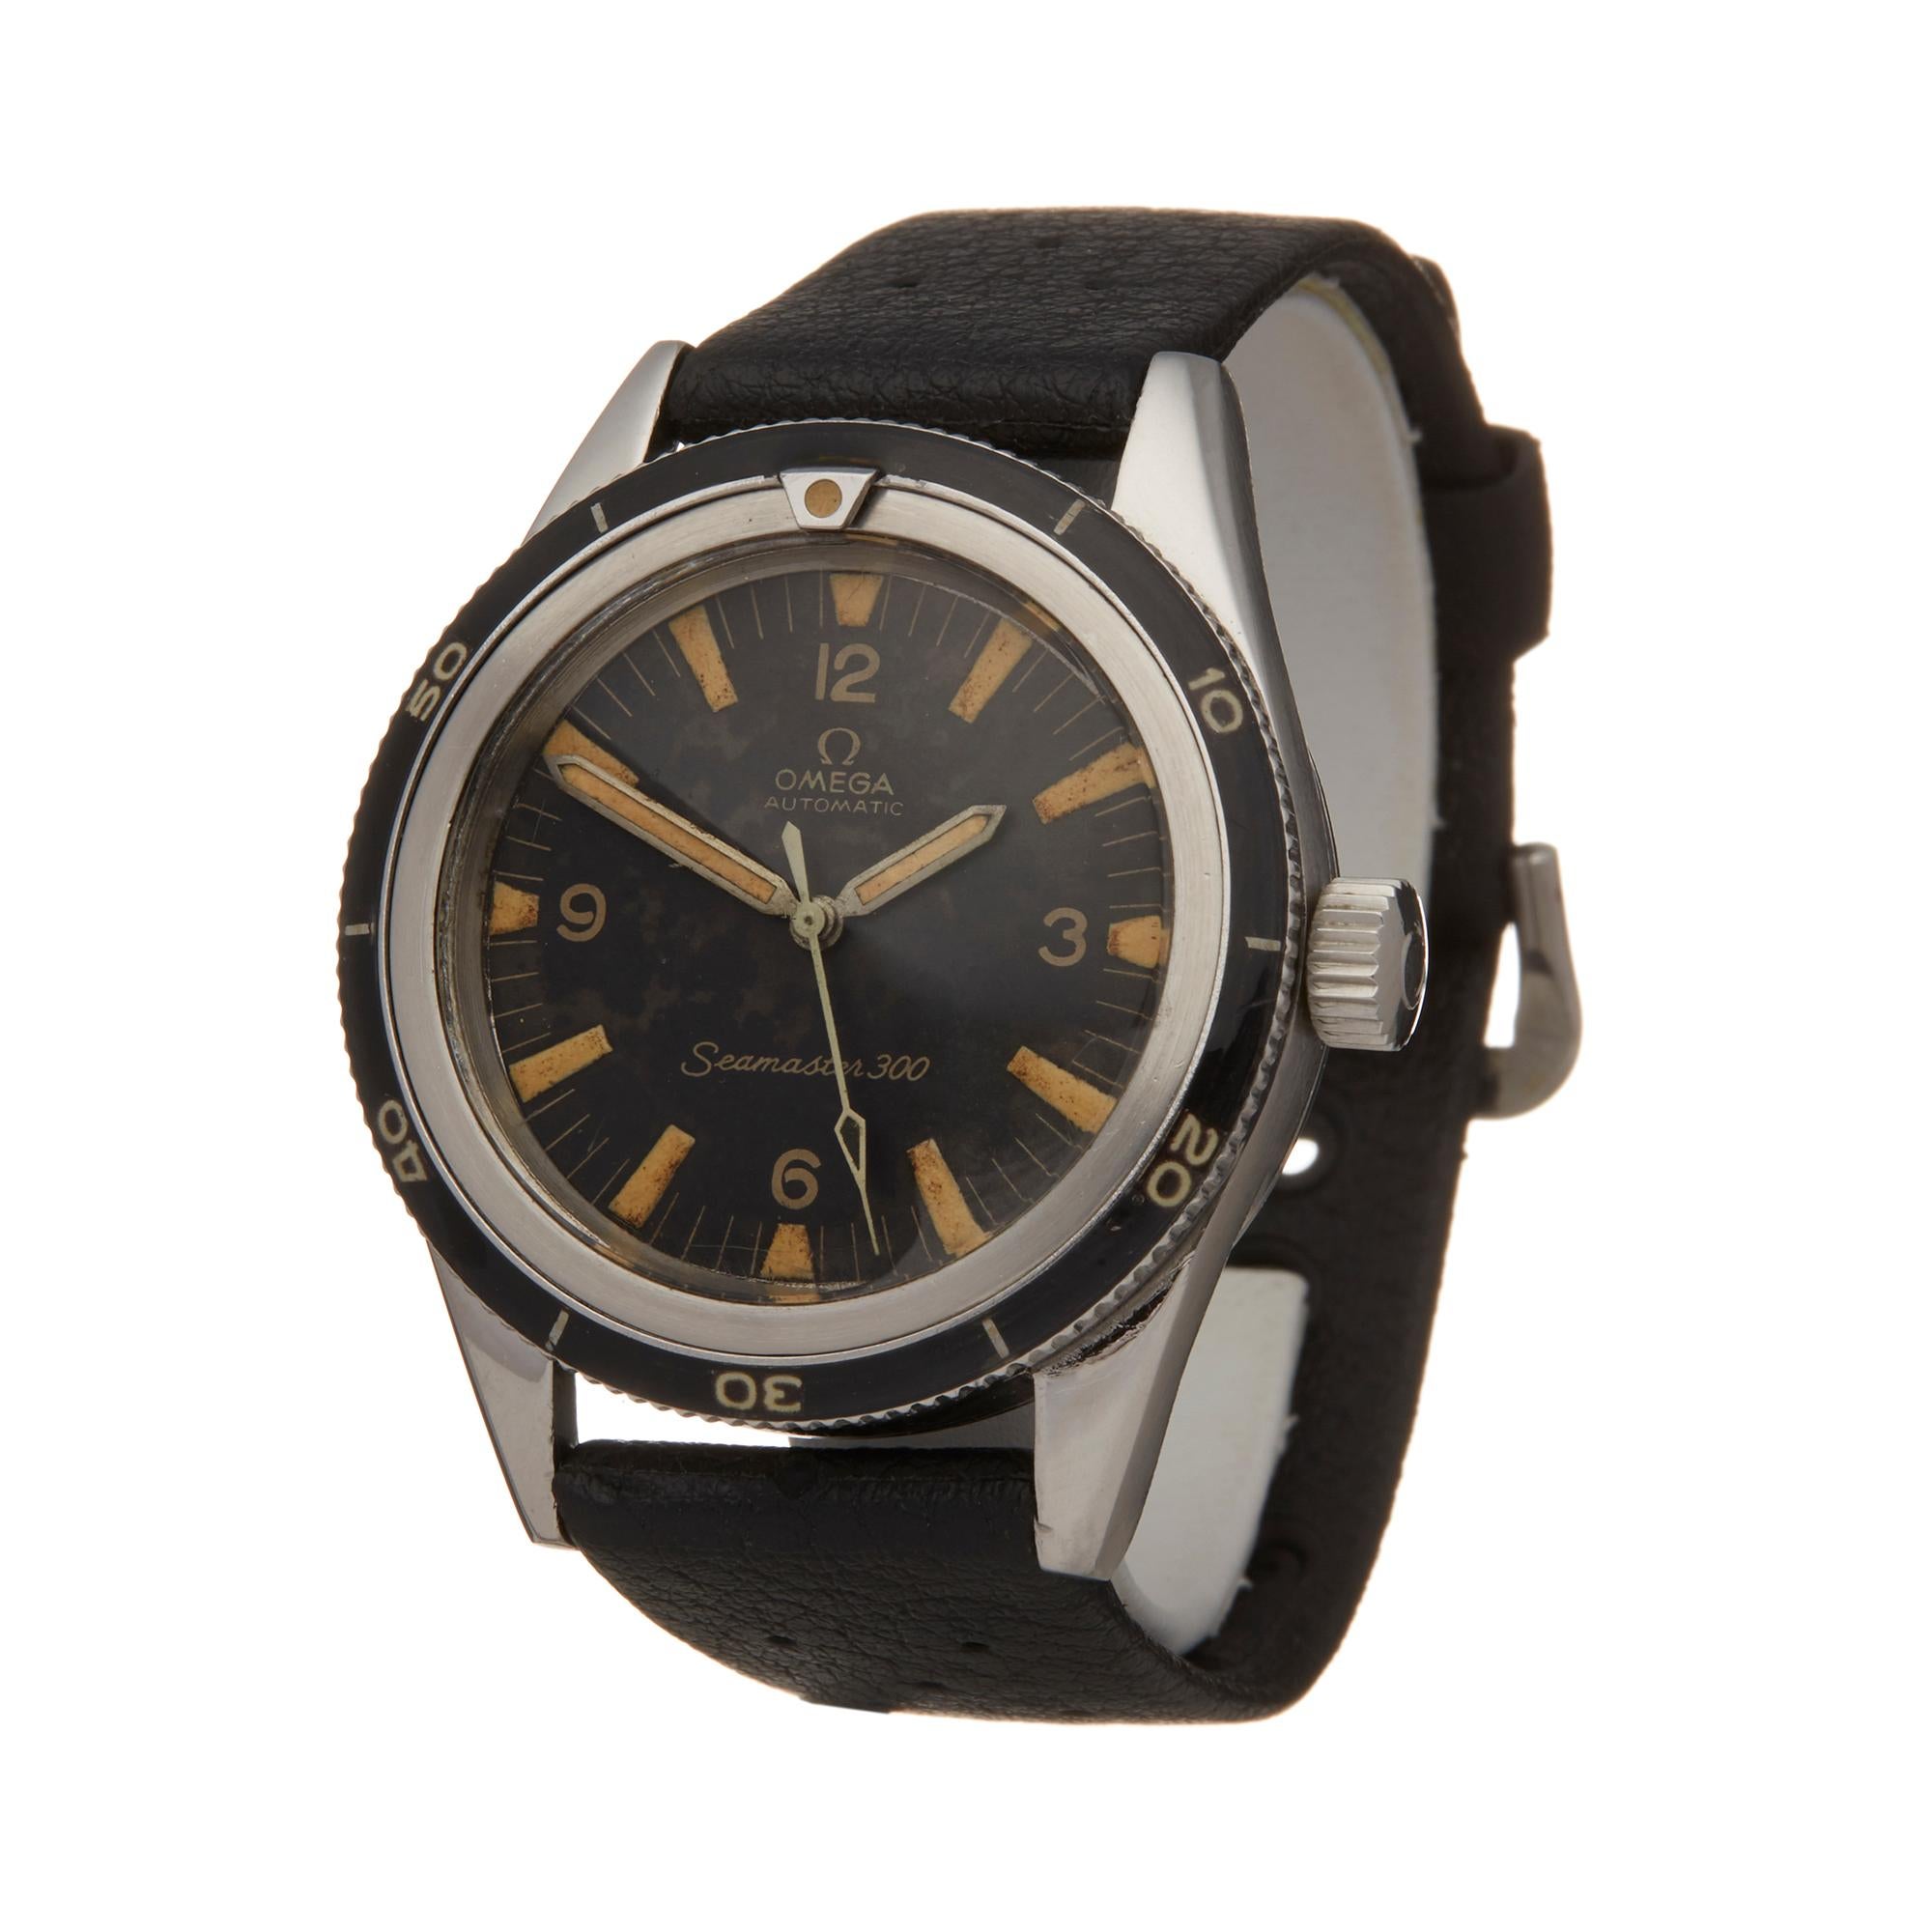 Ref: W5889
Manufacturer: Omega
Model: Seamaster
Model Ref: Cal. 552
Age: Circa 1962
Gender: Mens
Complete With: Presentation Box & Extract
Dial: Black Baton
Glass: Plexiglass
Movement: Automatic
Water Resistance: To Manufacturers